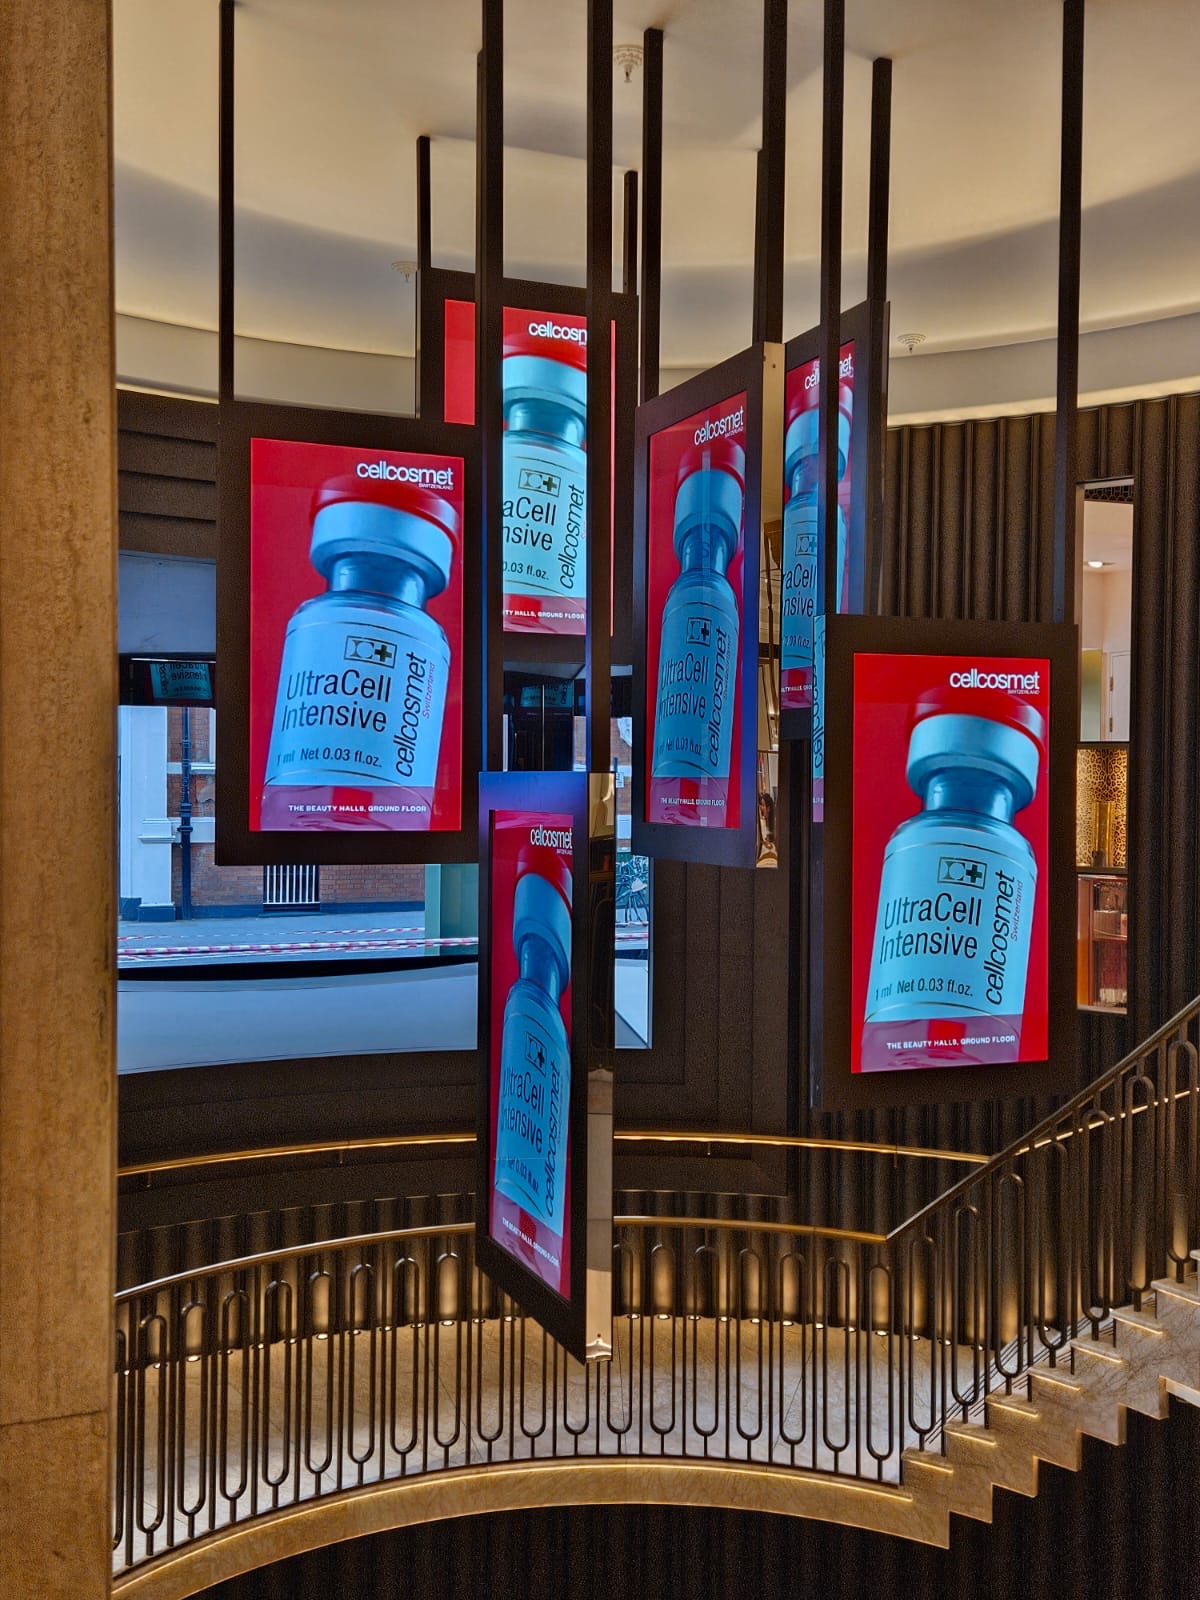 Cellcosmet launches at Harrods White Hall